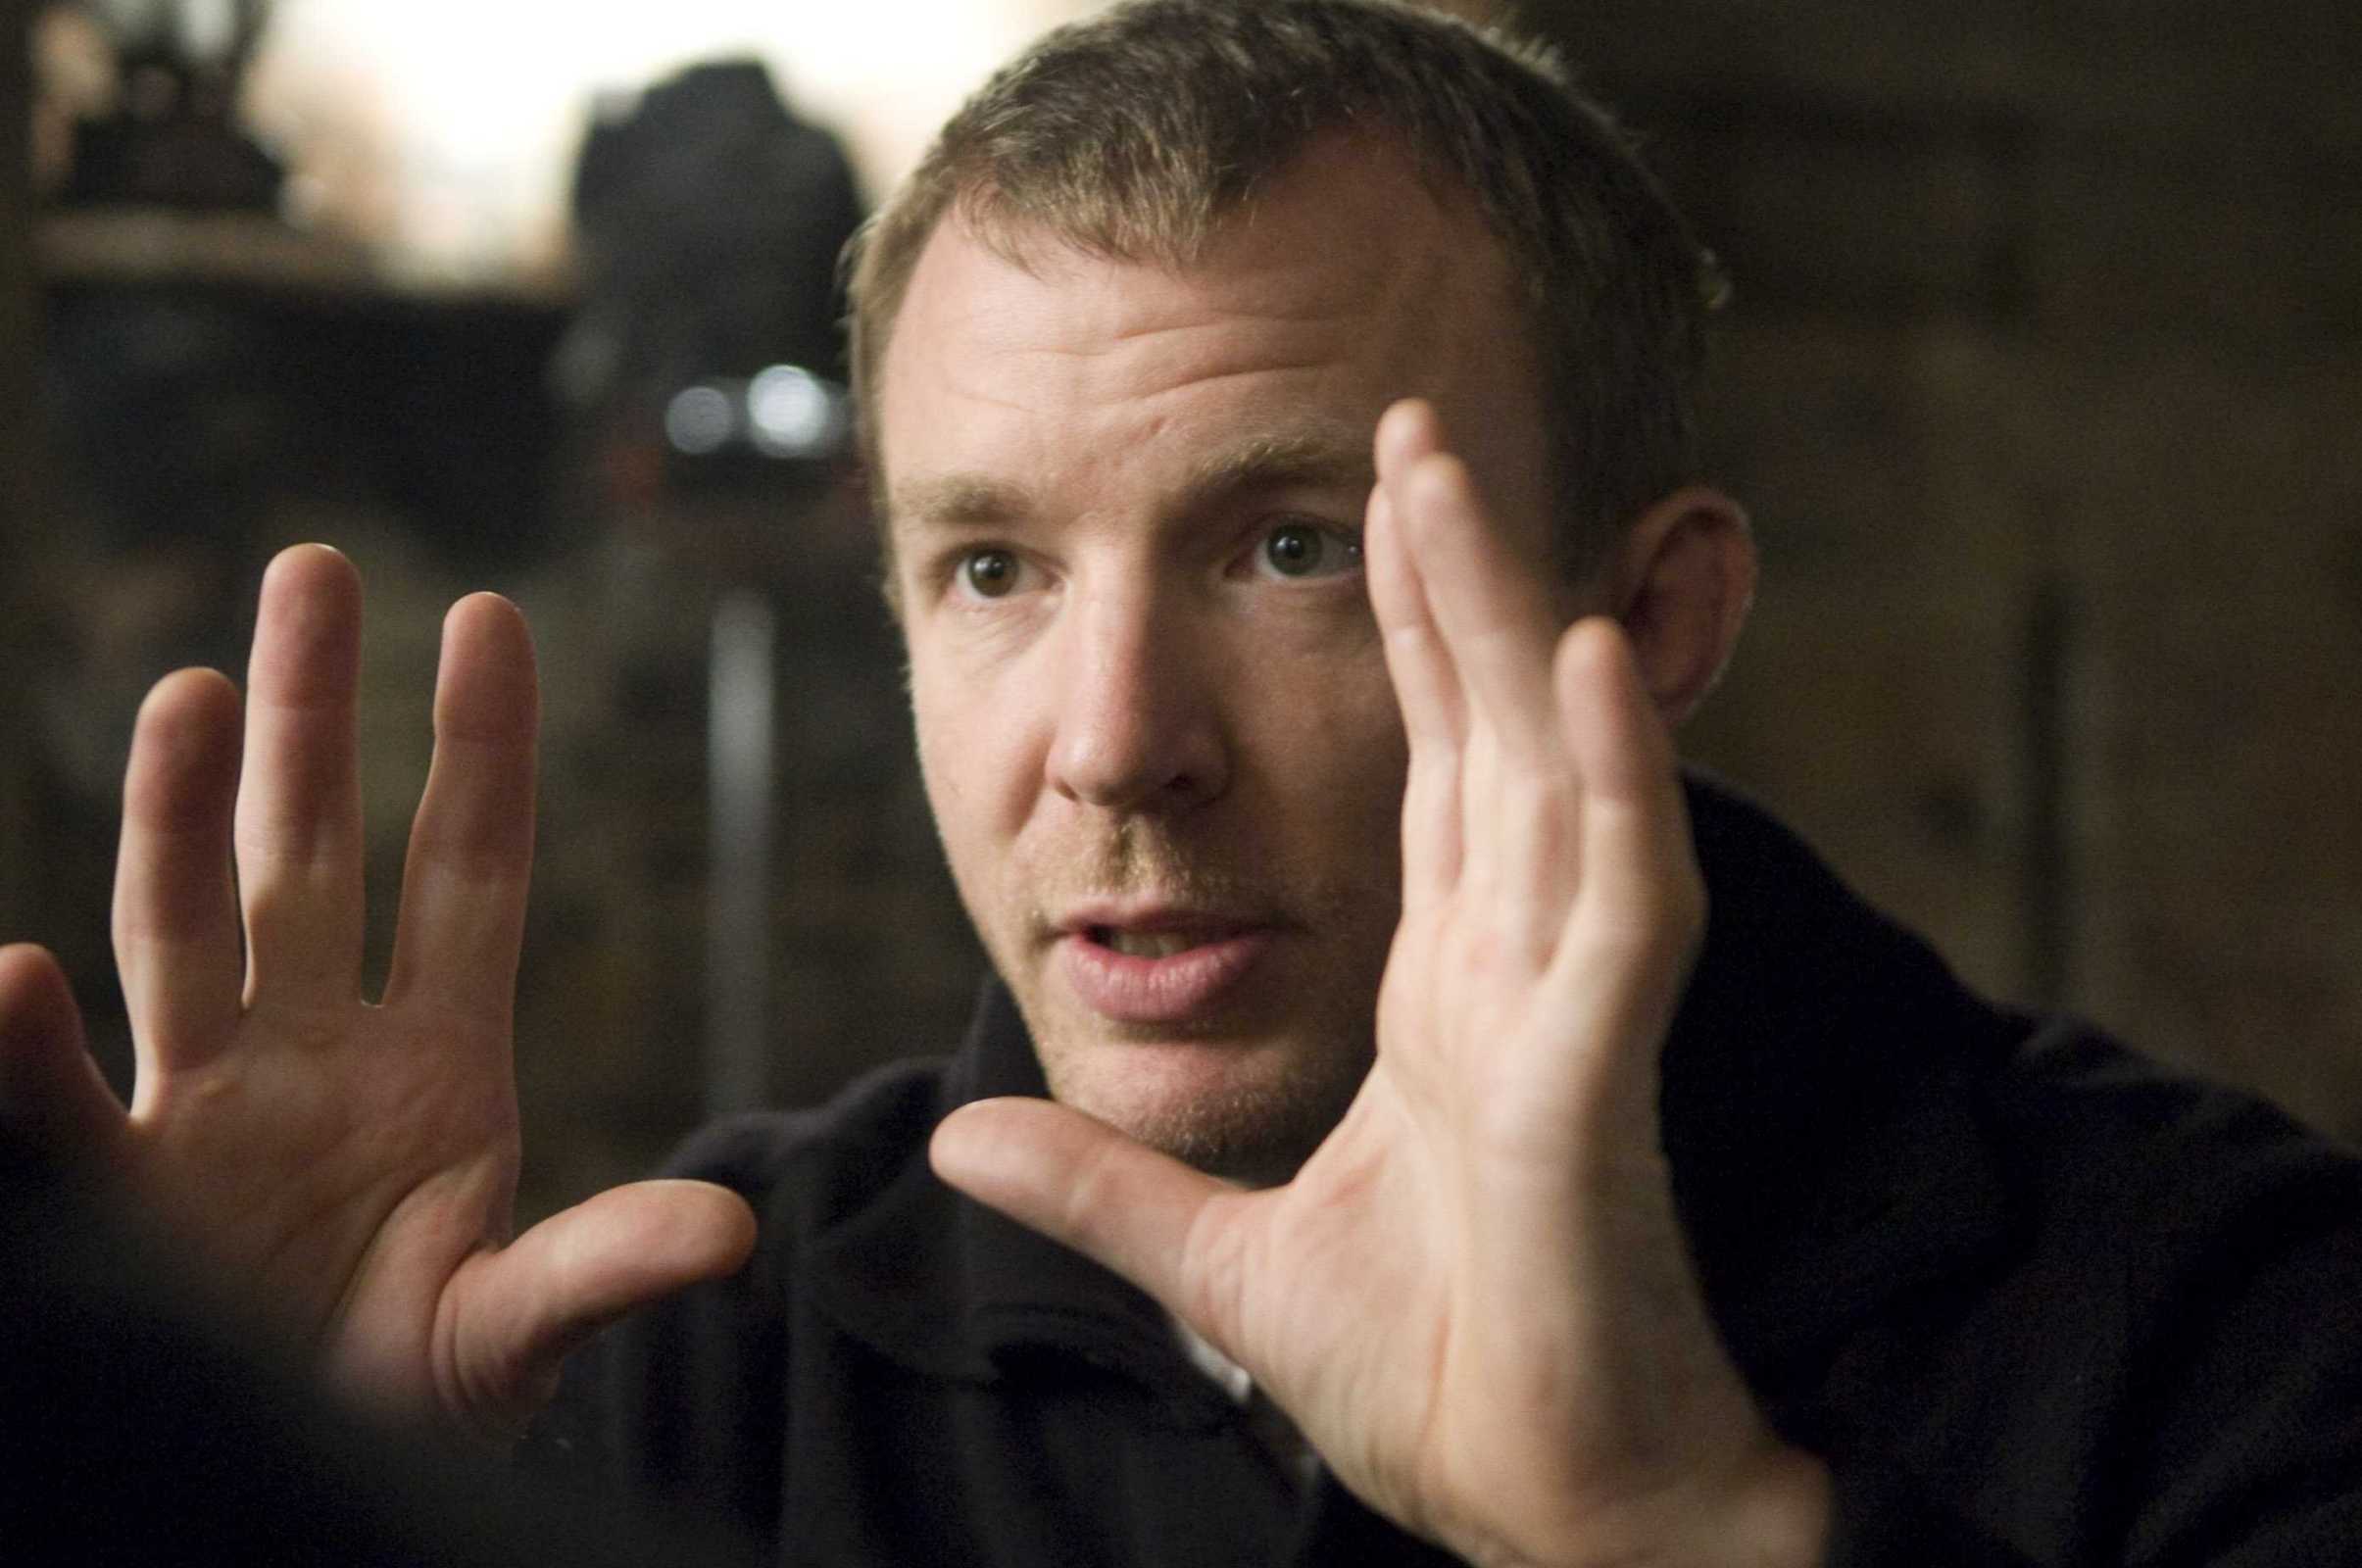 SHH-14382 Director GUY RITCHIE on the set of Warner Bros. PicturesÕ and Village Roadshow PicturesÕ action-adventure mystery ÒSherlock Holmes,Ó distributed by Warner Bros. Pictures.